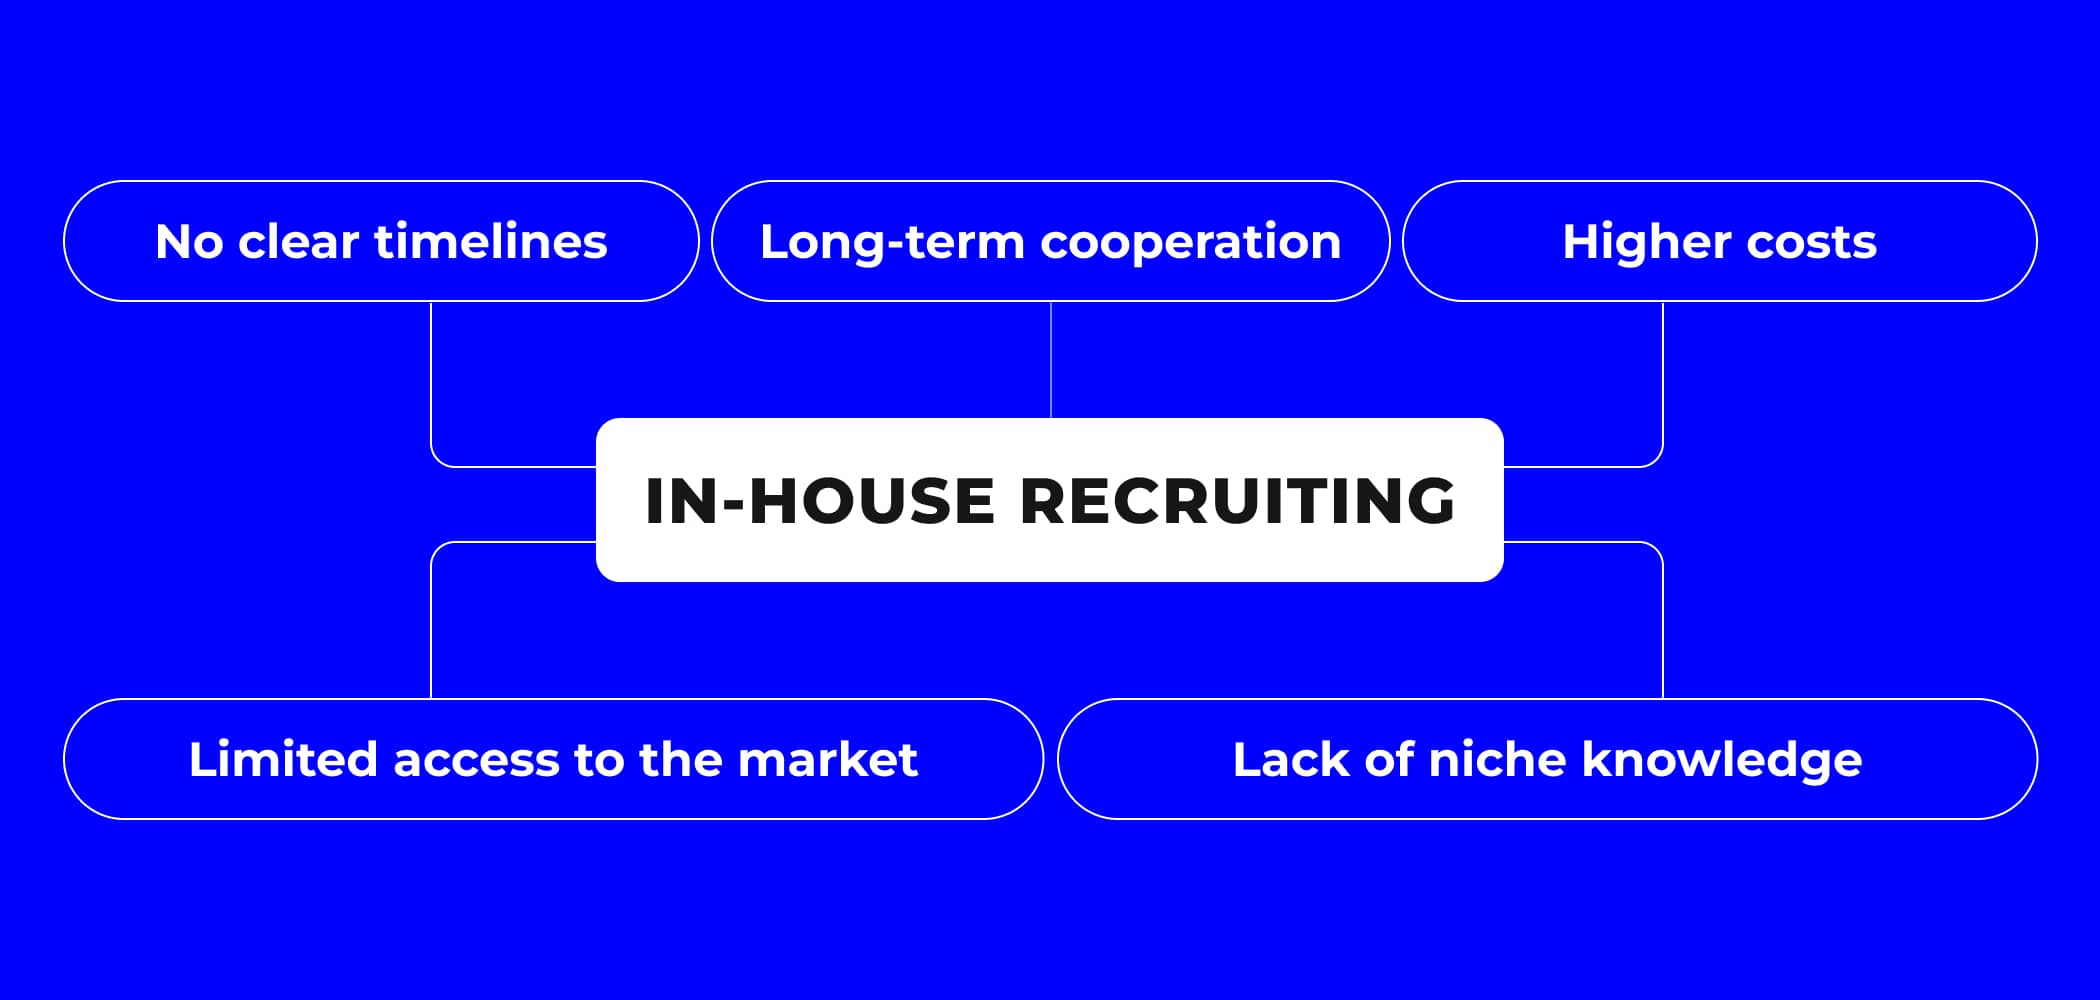 In-house recruiting model